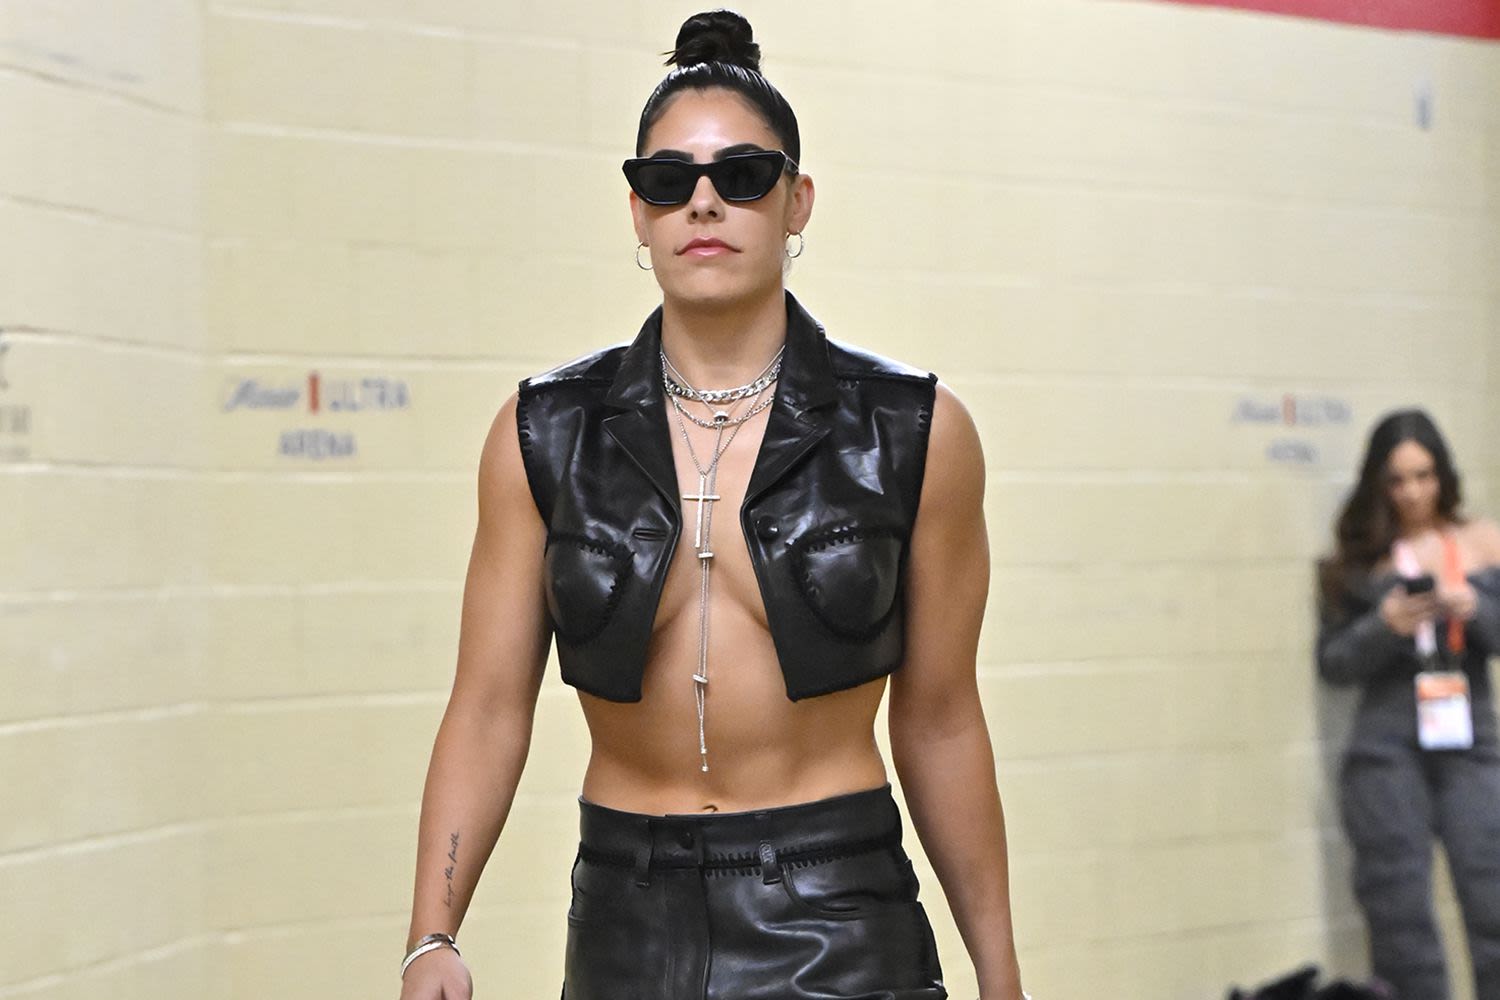 WNBA Star Kelsey Plum Ditches Bra in Leather Vest at Season Opener: See Her Breakover Style Moment